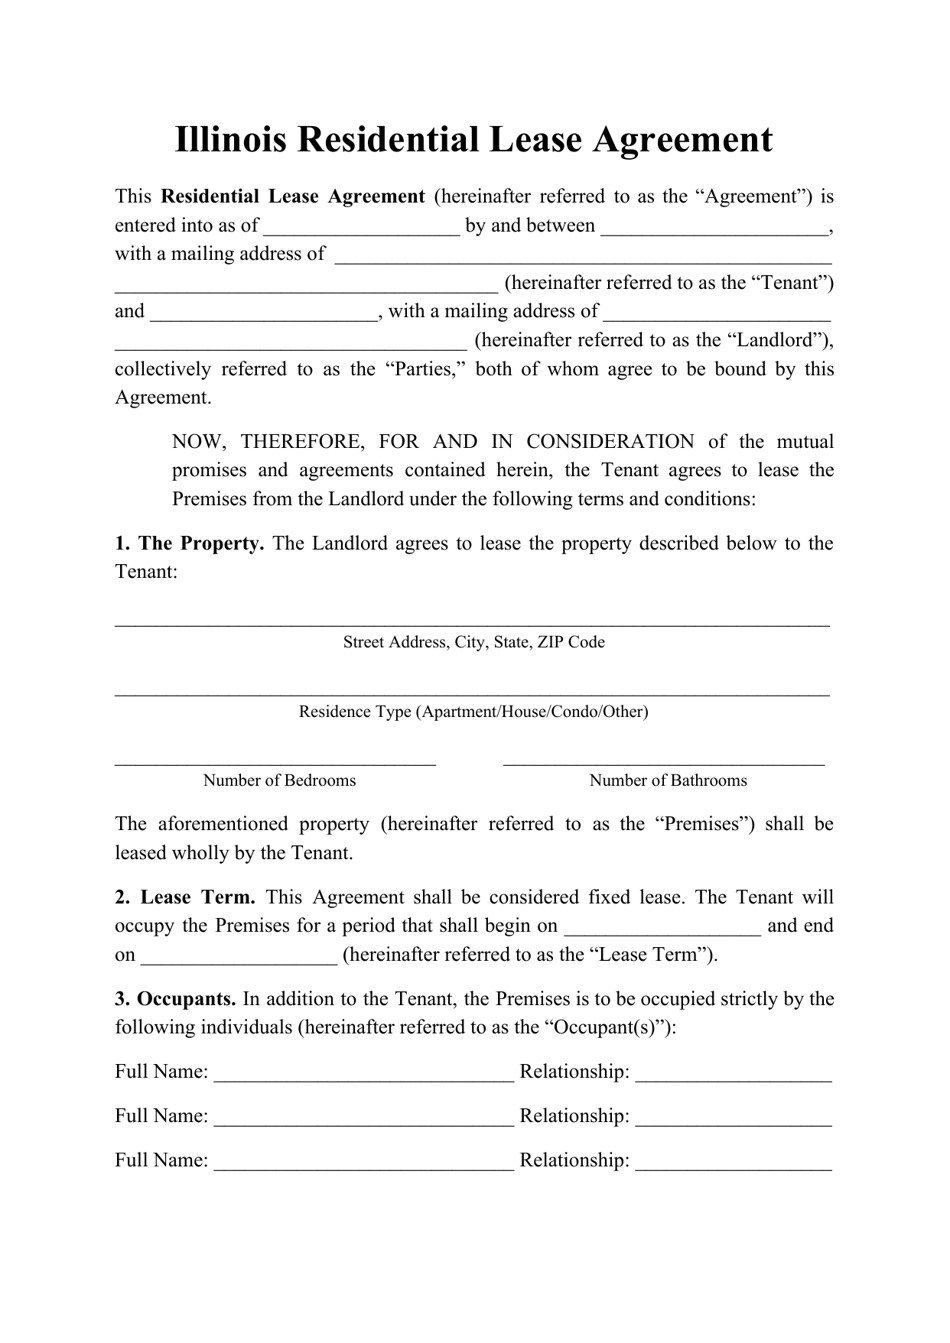 illinois residential lease agreement template download printable pdf templateroller